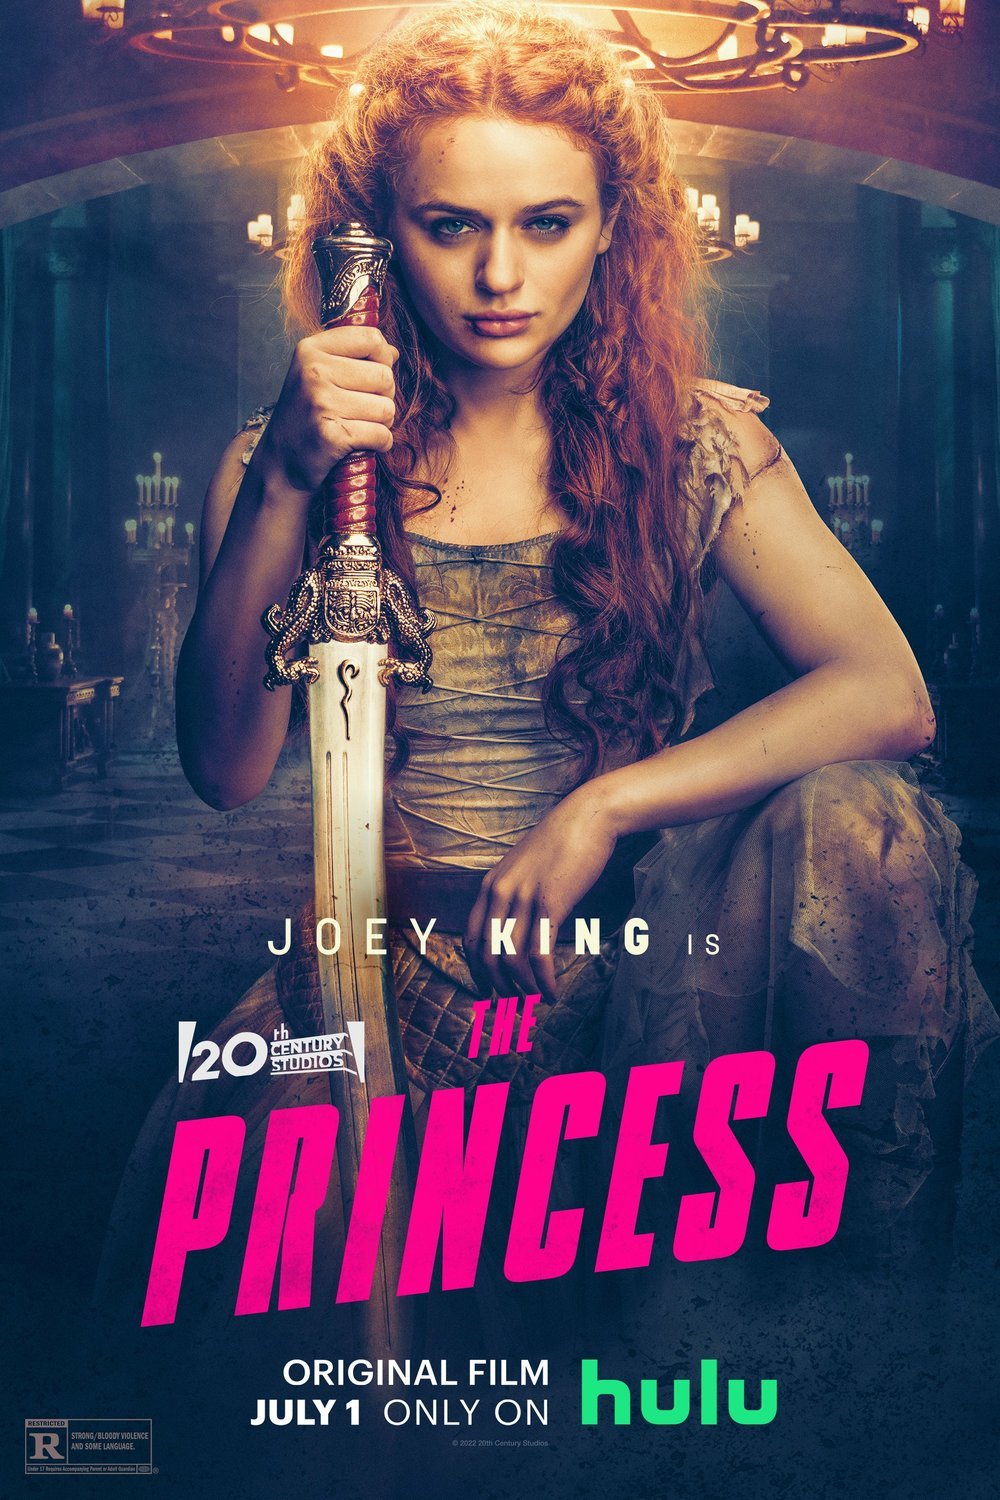 Poster of the movie The Princess